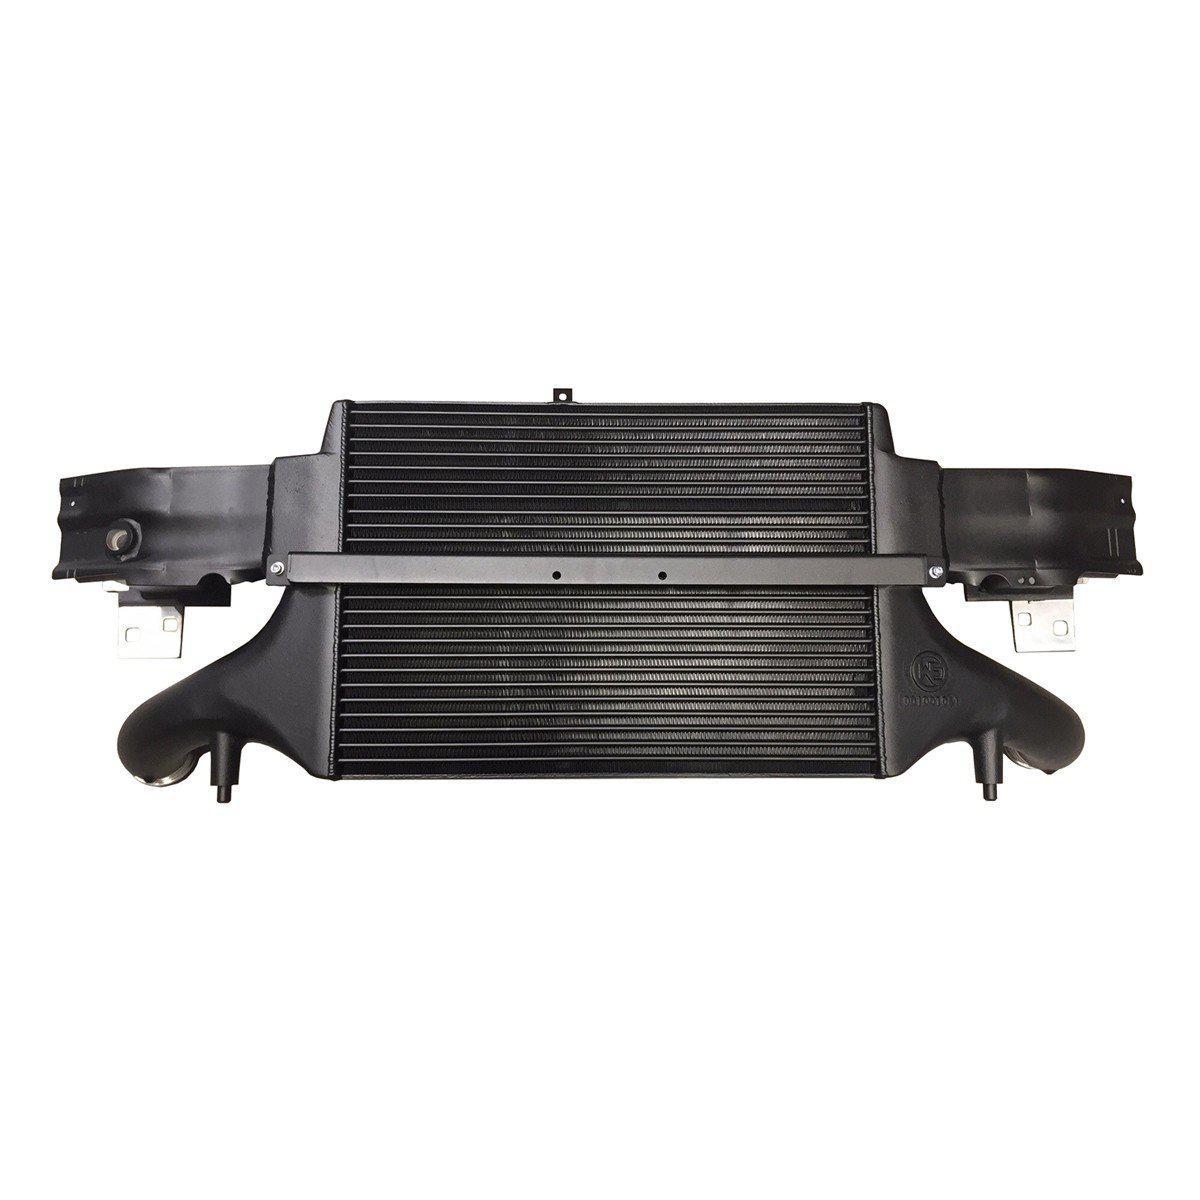 Wagner Tuning Evo 3 Competition Intercooler Kit For 8V/8V.5 Audi RS3 With Adaptive Cruise Control-A Little Tuning Co